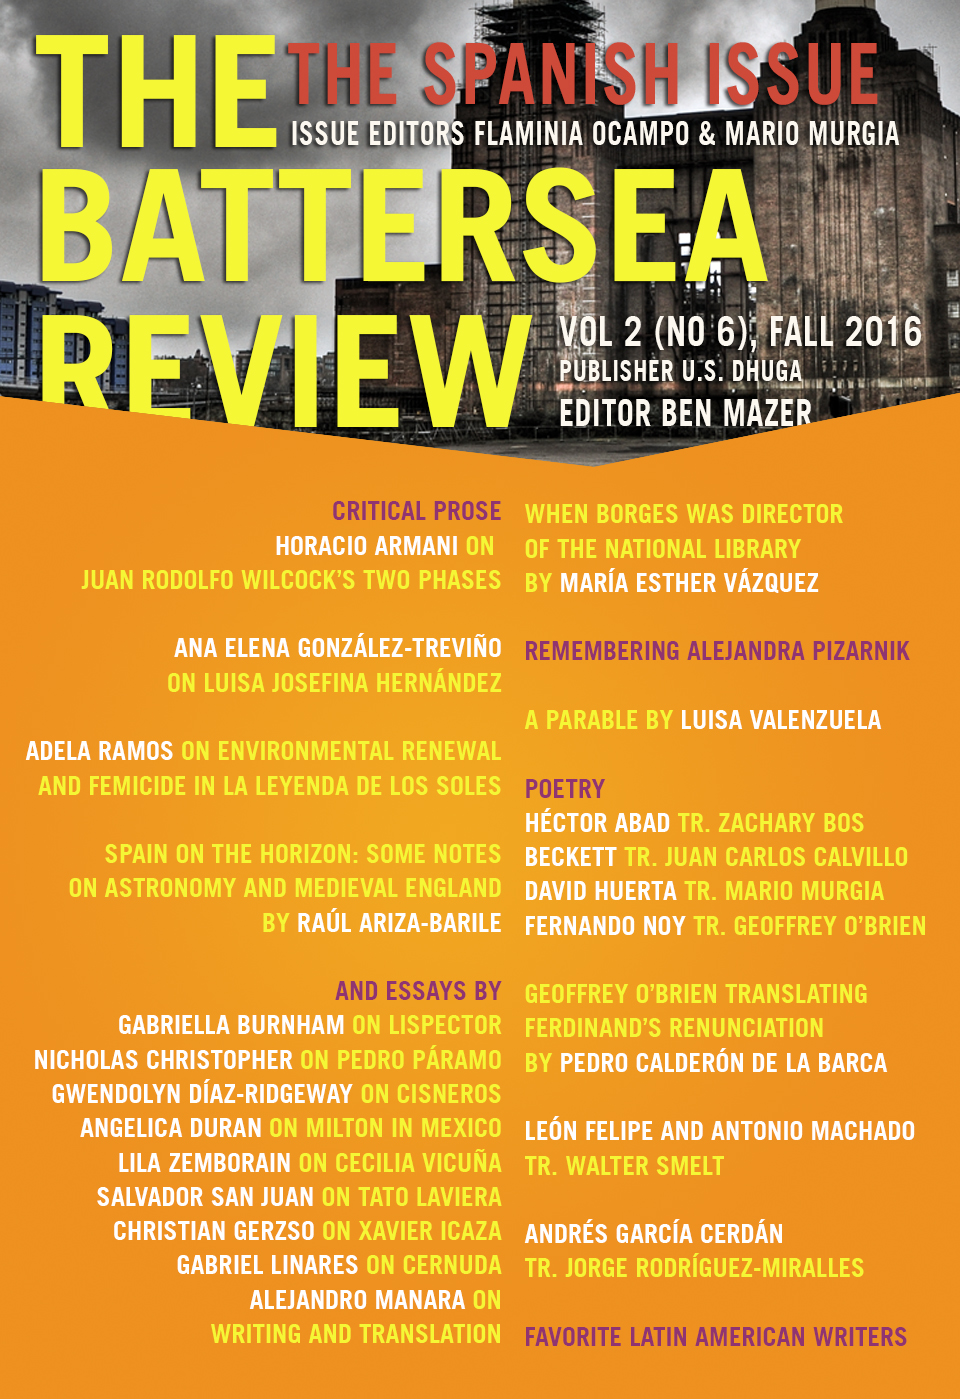 The Spanish Issue of The Battersea Review, Fall 2016